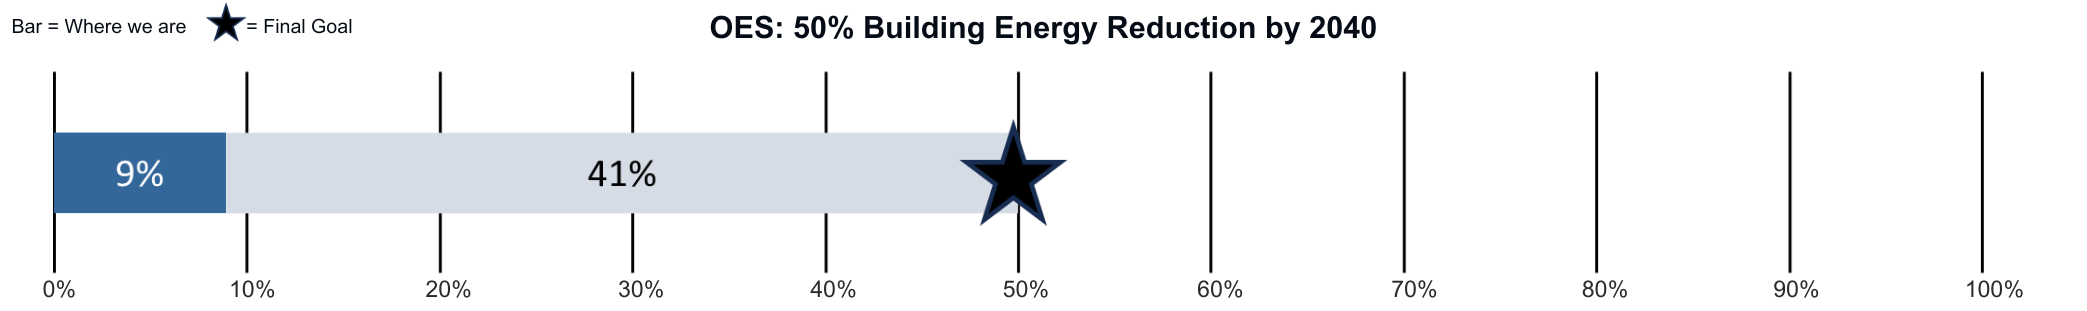 OES_ 50% county government building energy reduction by 2040 goal bar showing a 9% progress